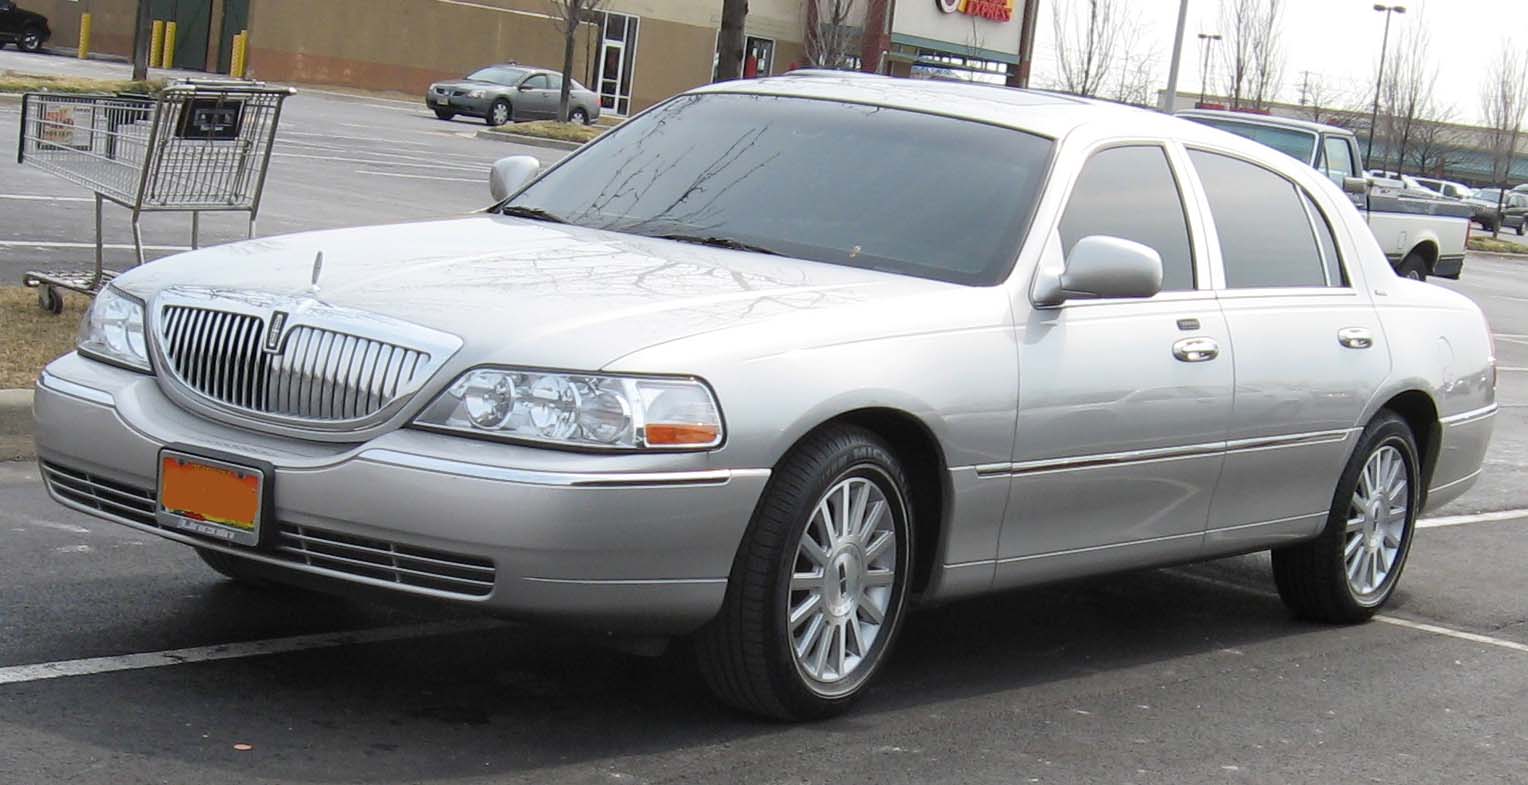 File:2003-2007 Lincoln Town Car.jpg - Wikimedia Commons